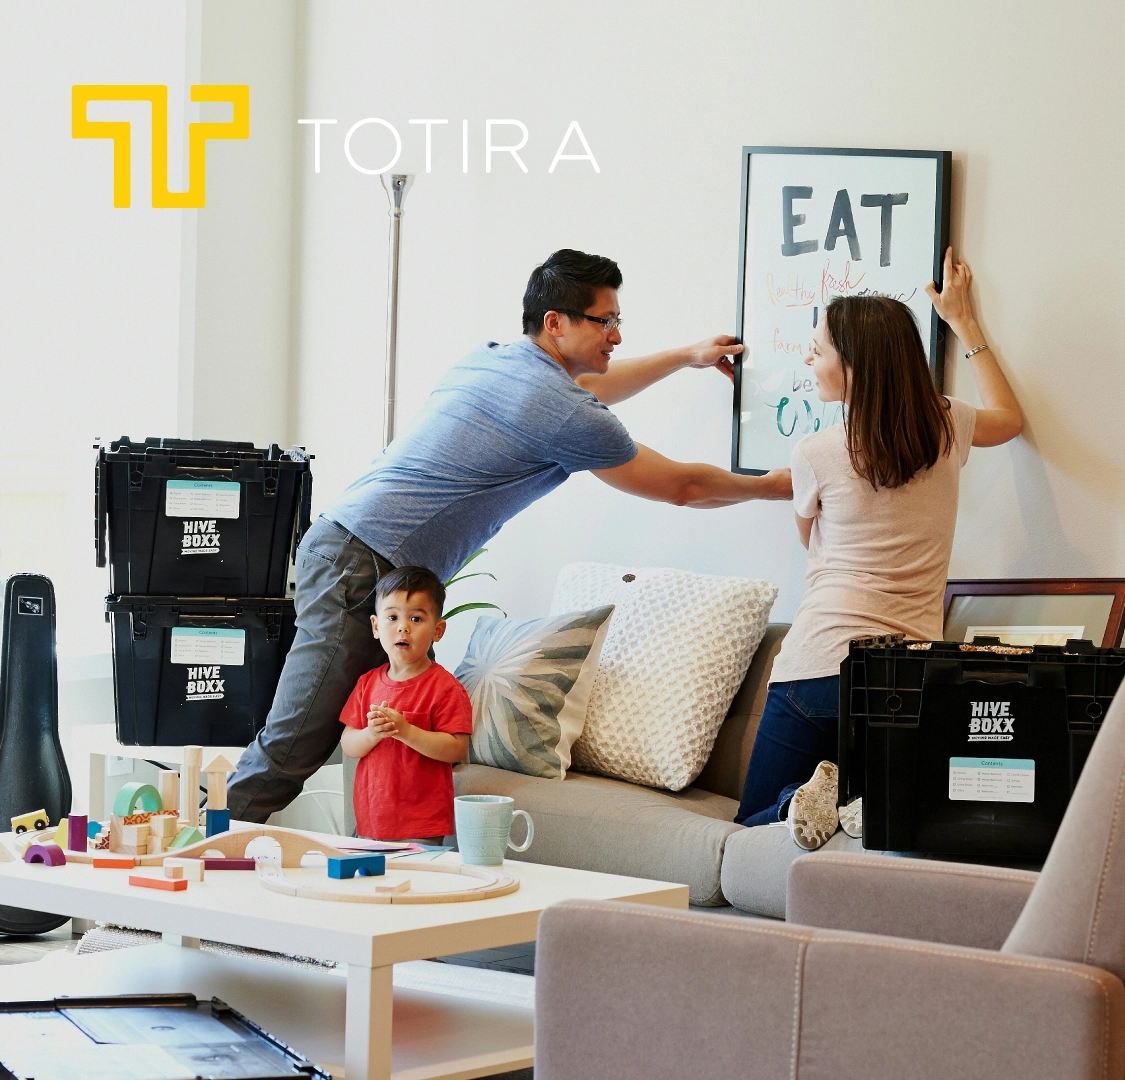 Family decorating home with Totira icon overlayed